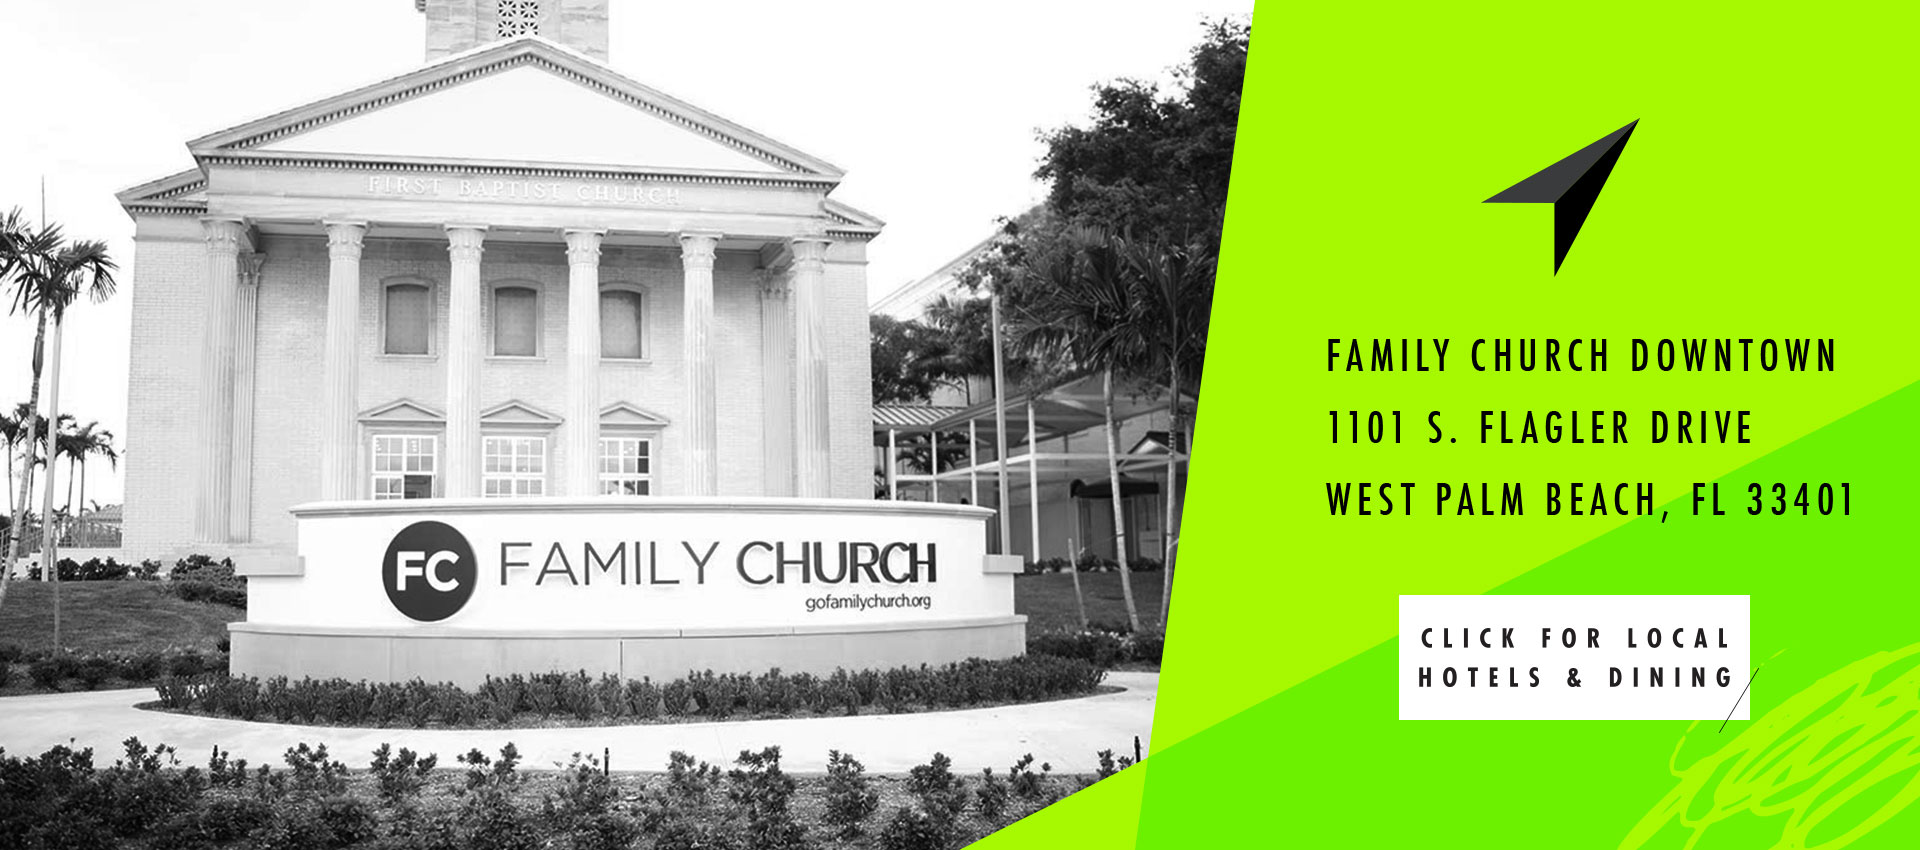 Image of Family Church Downtown. Located in West Palm Beach, Florida.